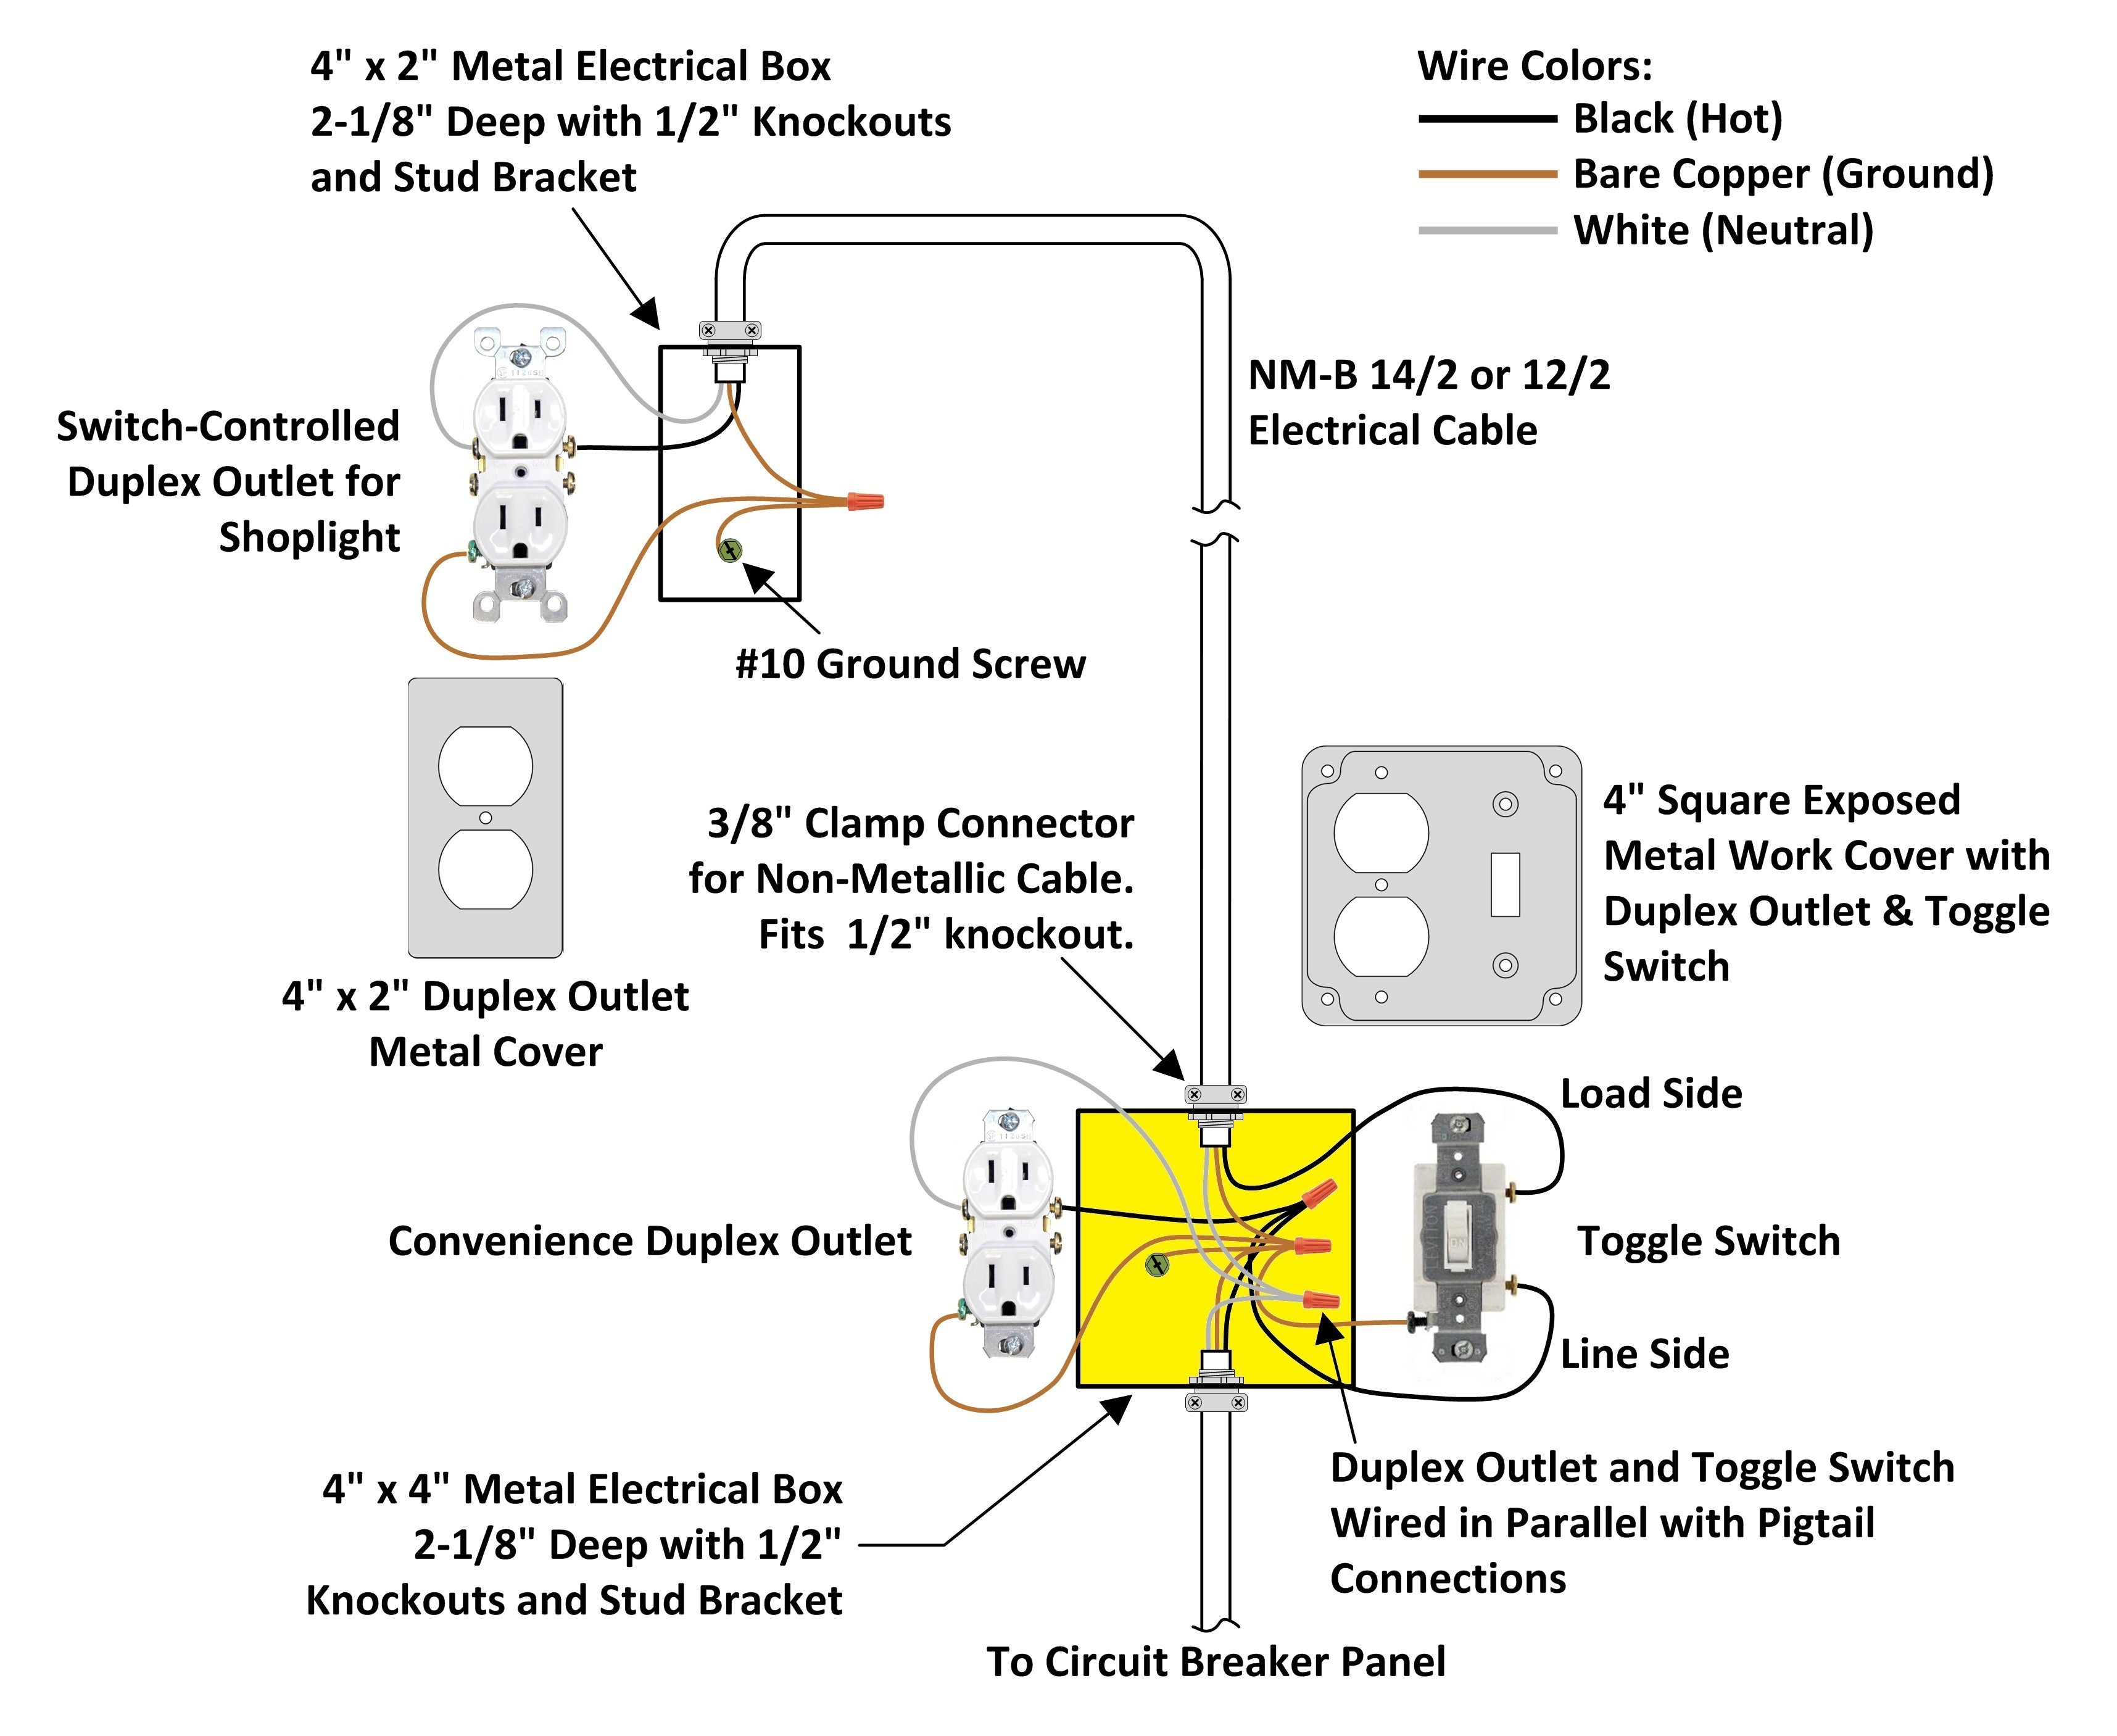 Wiring Diagram for Triple Light Switch Inspirationa Wiring Diagram for Triple Light Switch Inspirationa Electrical